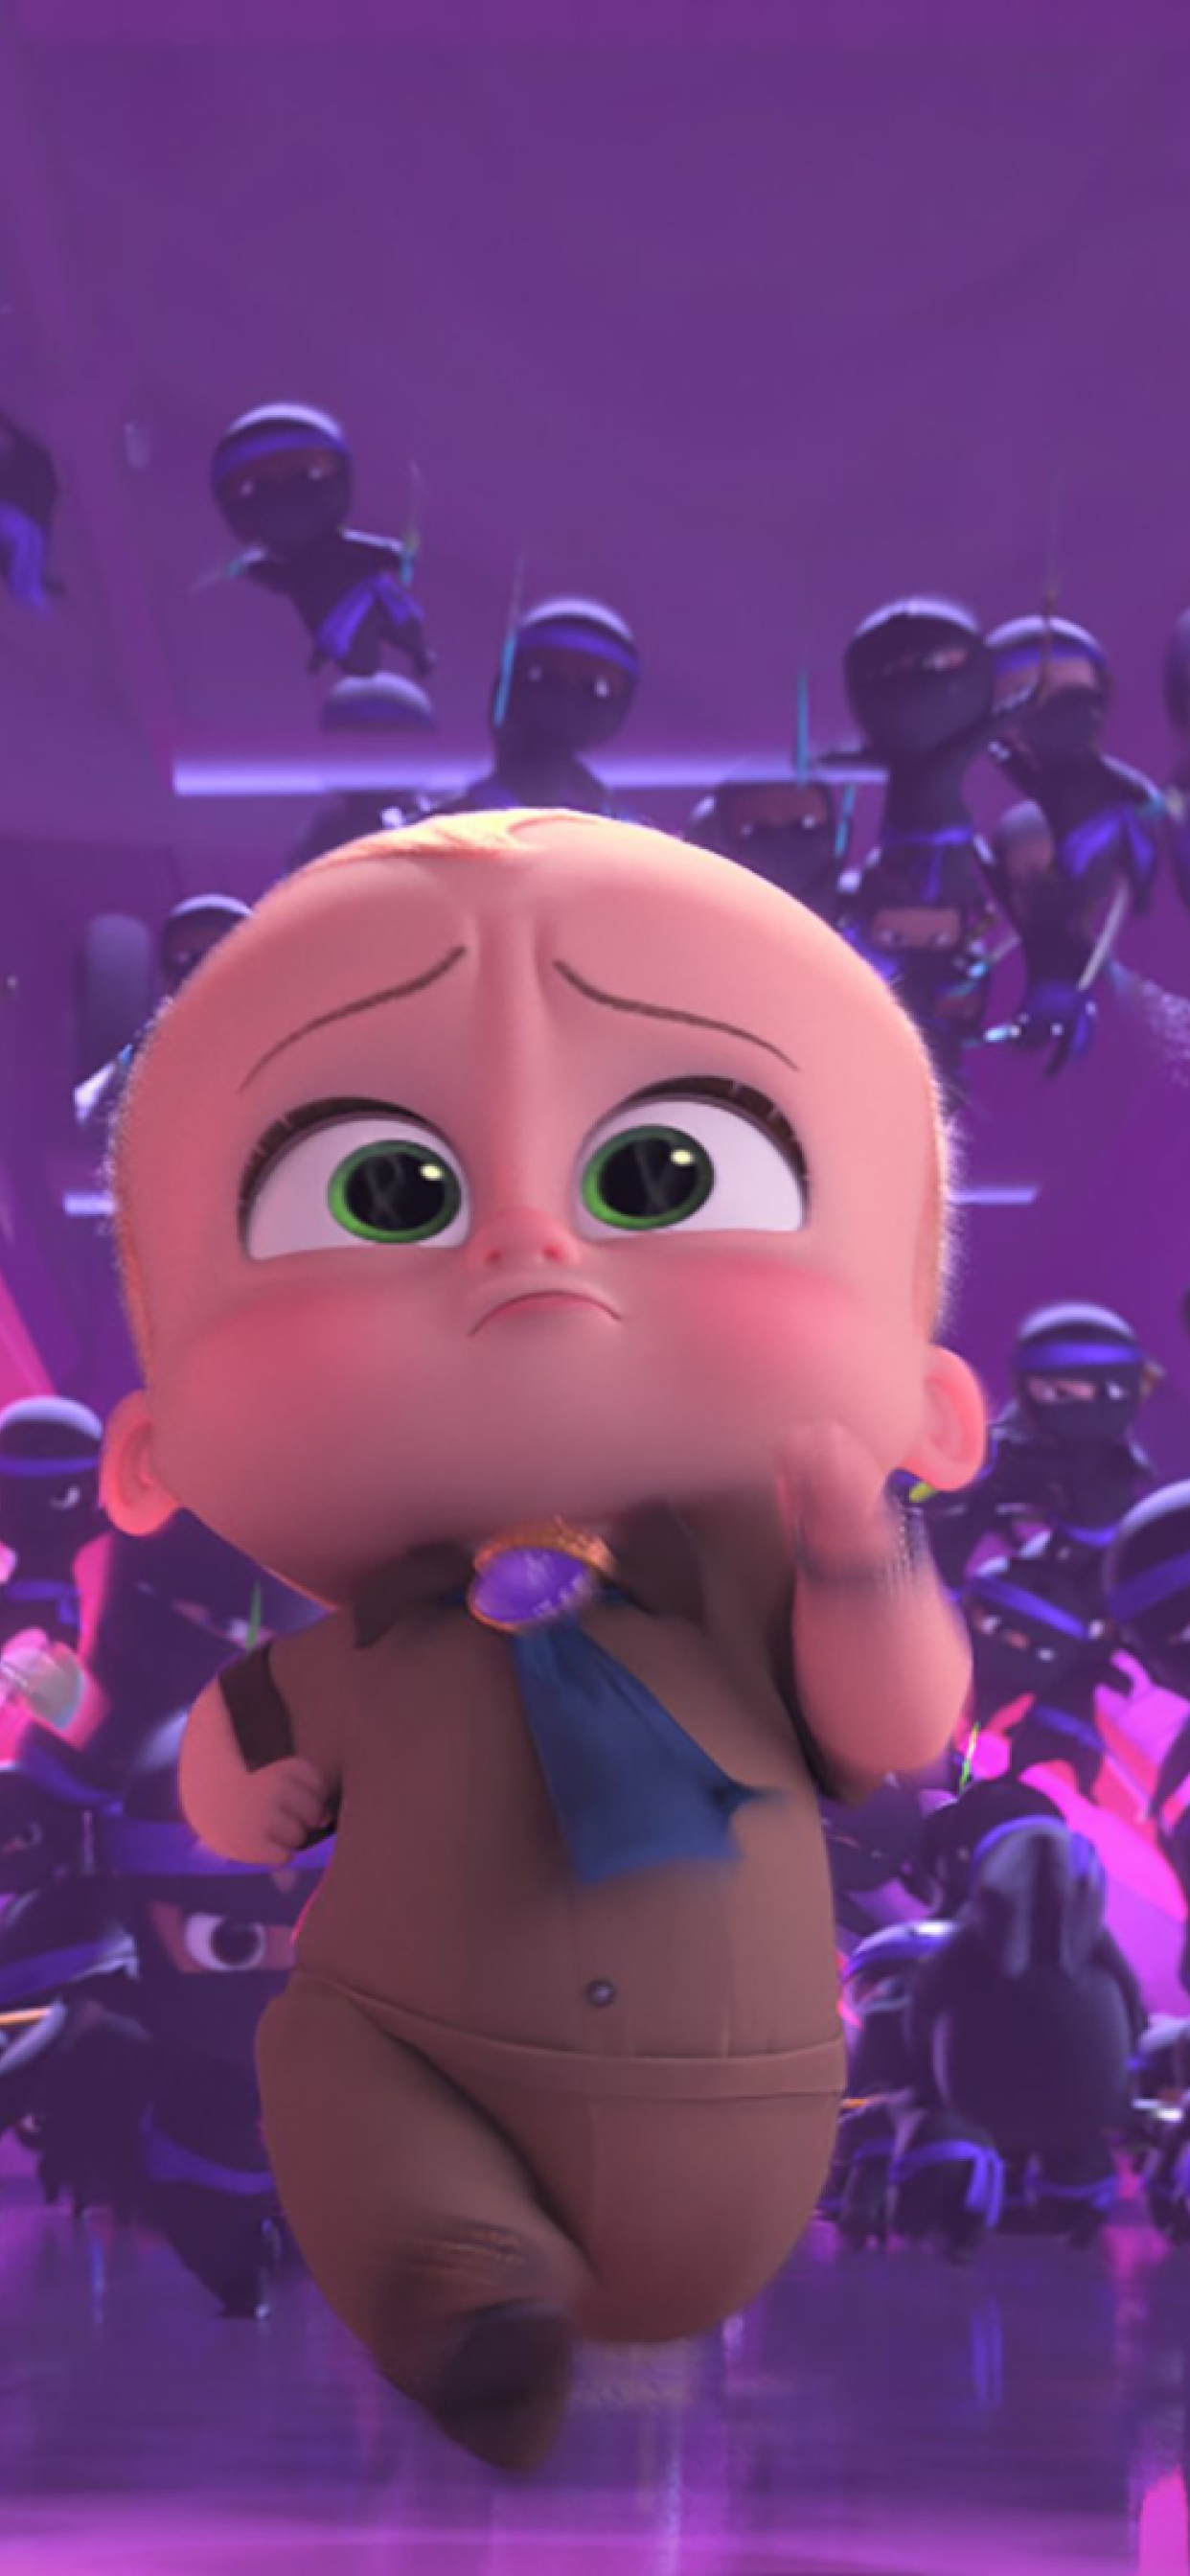 Download The Boss Baby wallpapers for mobile phone free The Boss Baby  HD pictures